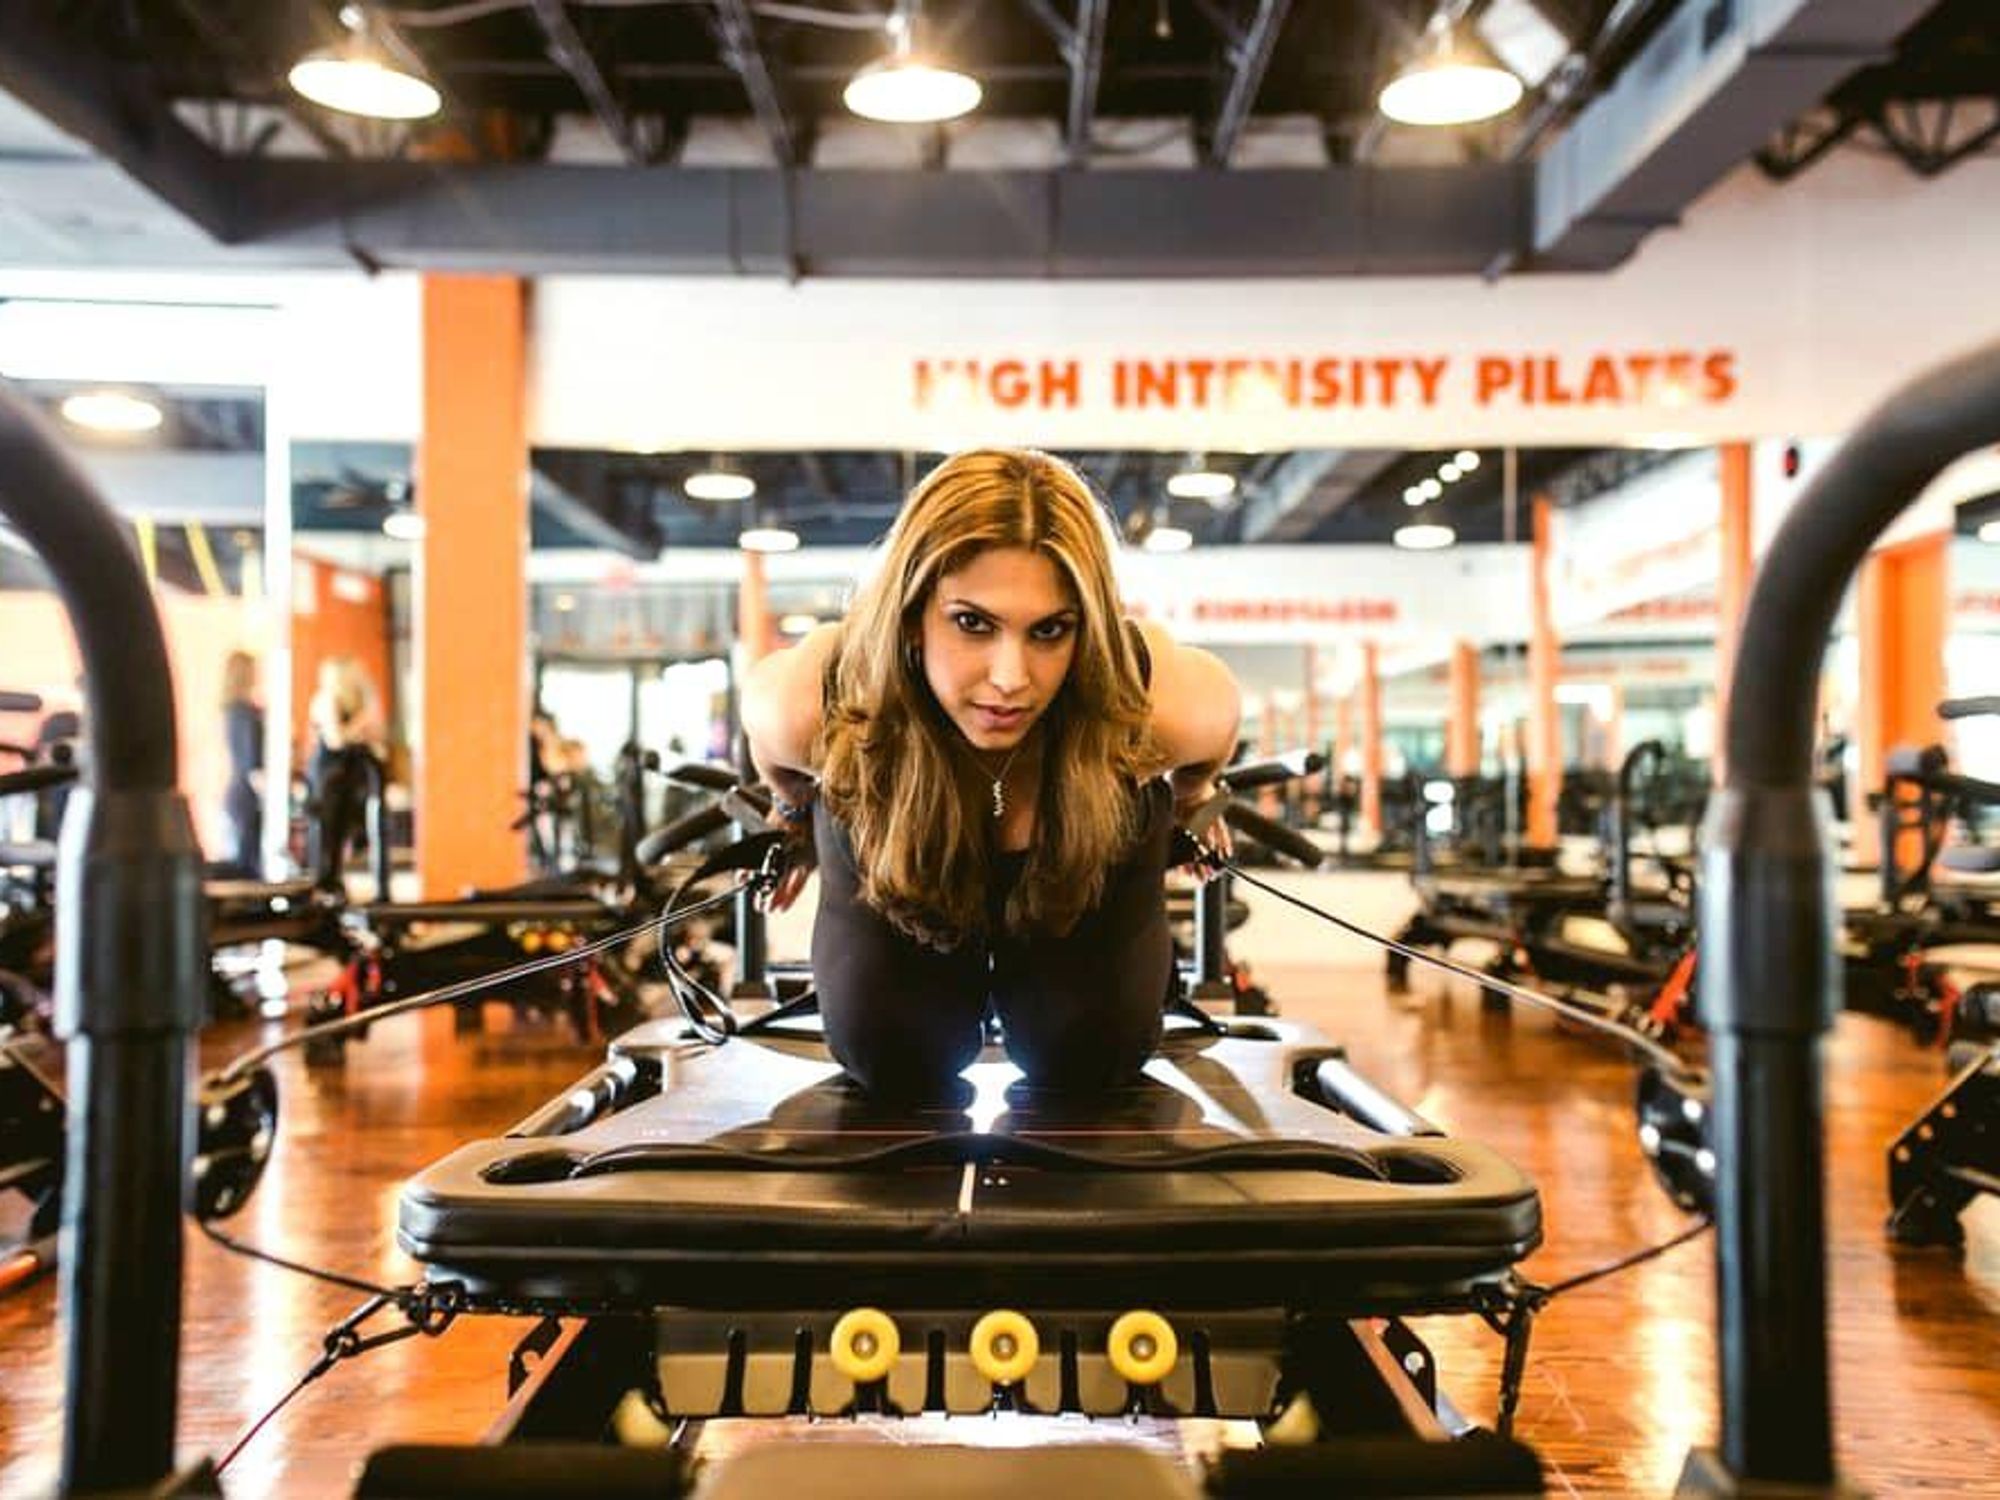 Get Your First Class Free  Orange theory workout, Group fitness classes,  High intensity workout